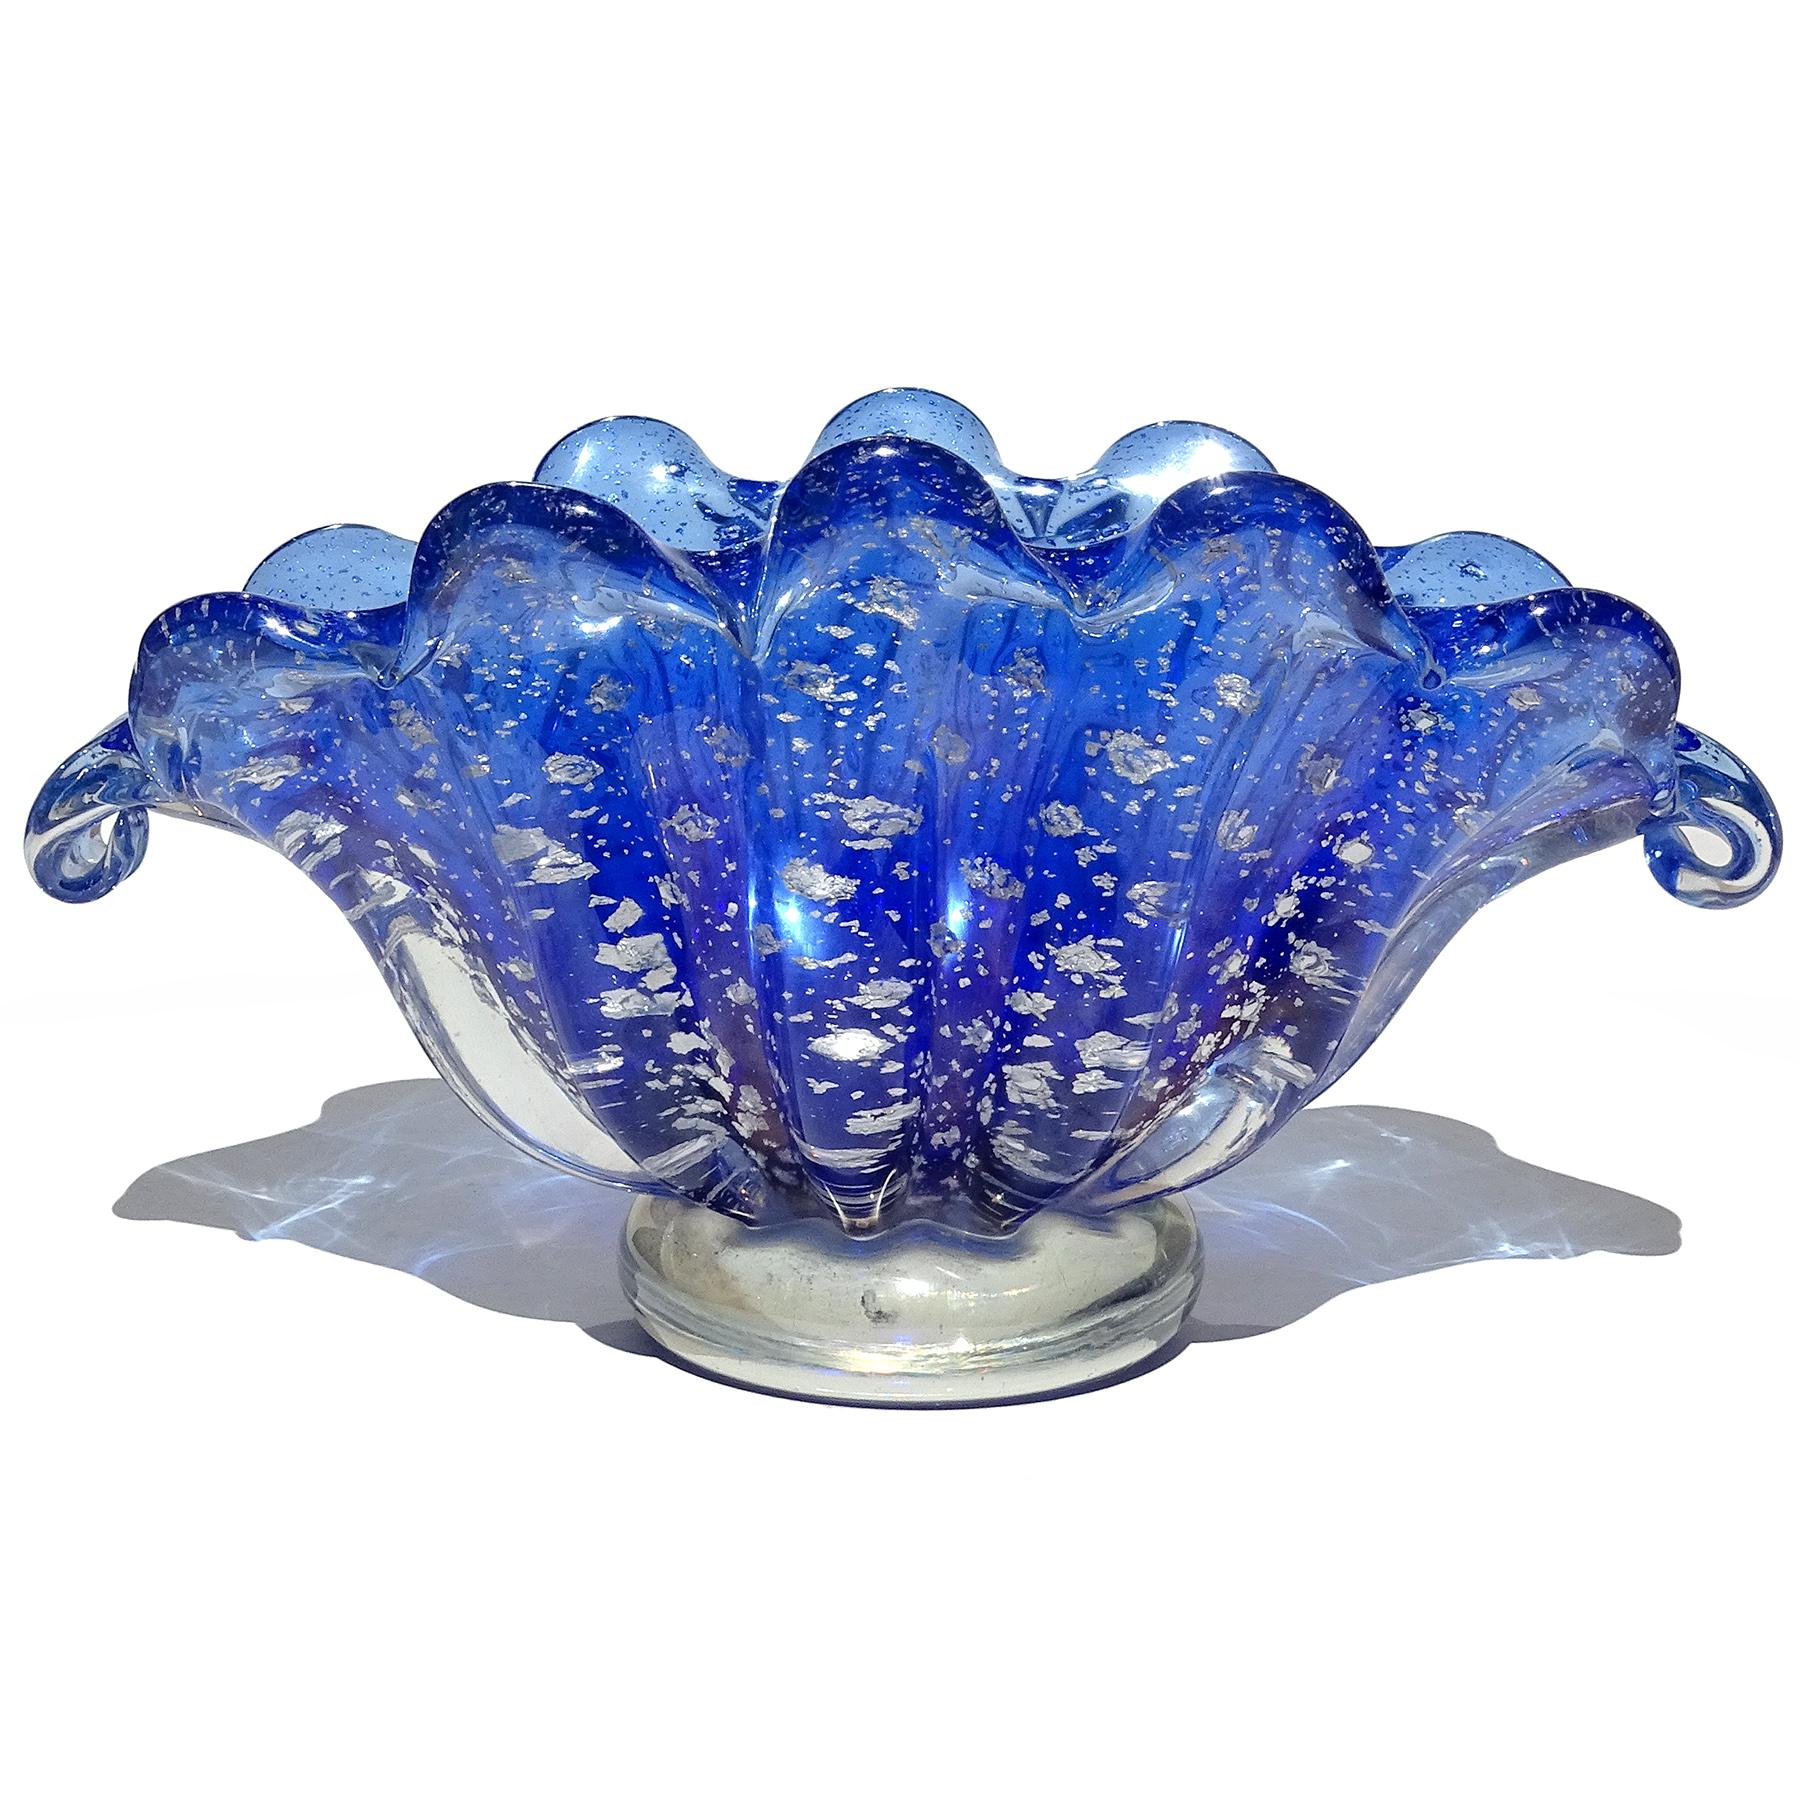 Beautiful vintage Murano hand blown cobalt blue, silver flecks, controlled bubbles Italian art glass bowl or vase. Attributed to the Barovier e Toso company. The piece has a clam shell shape with scallop rim and with applied clear foot. It also has